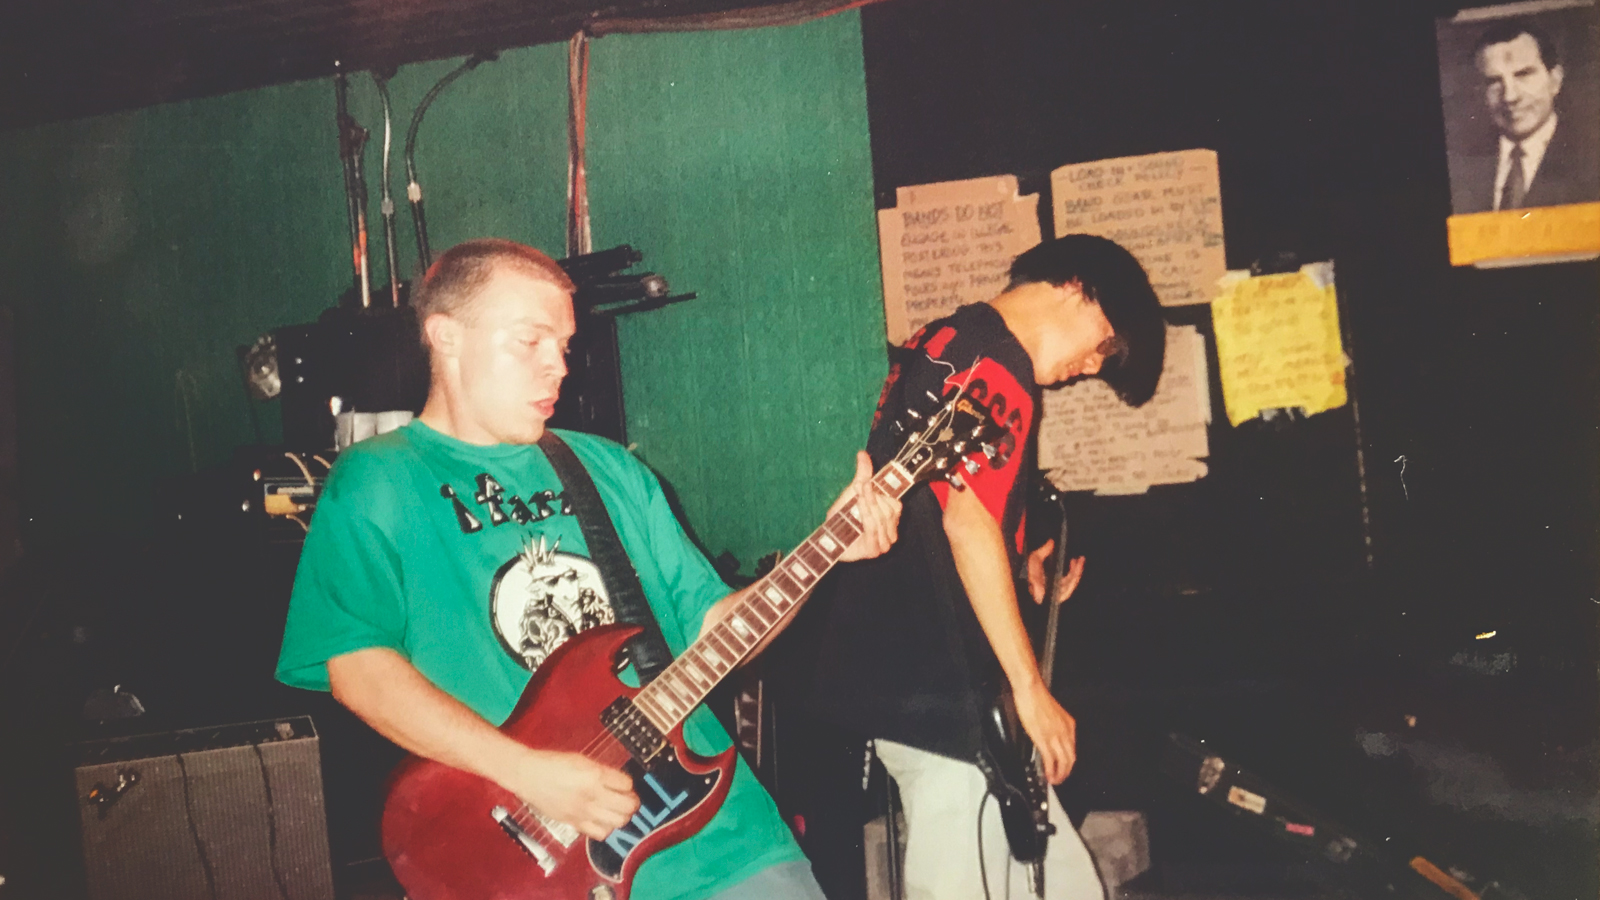 Two young men performing in a punk rock group.